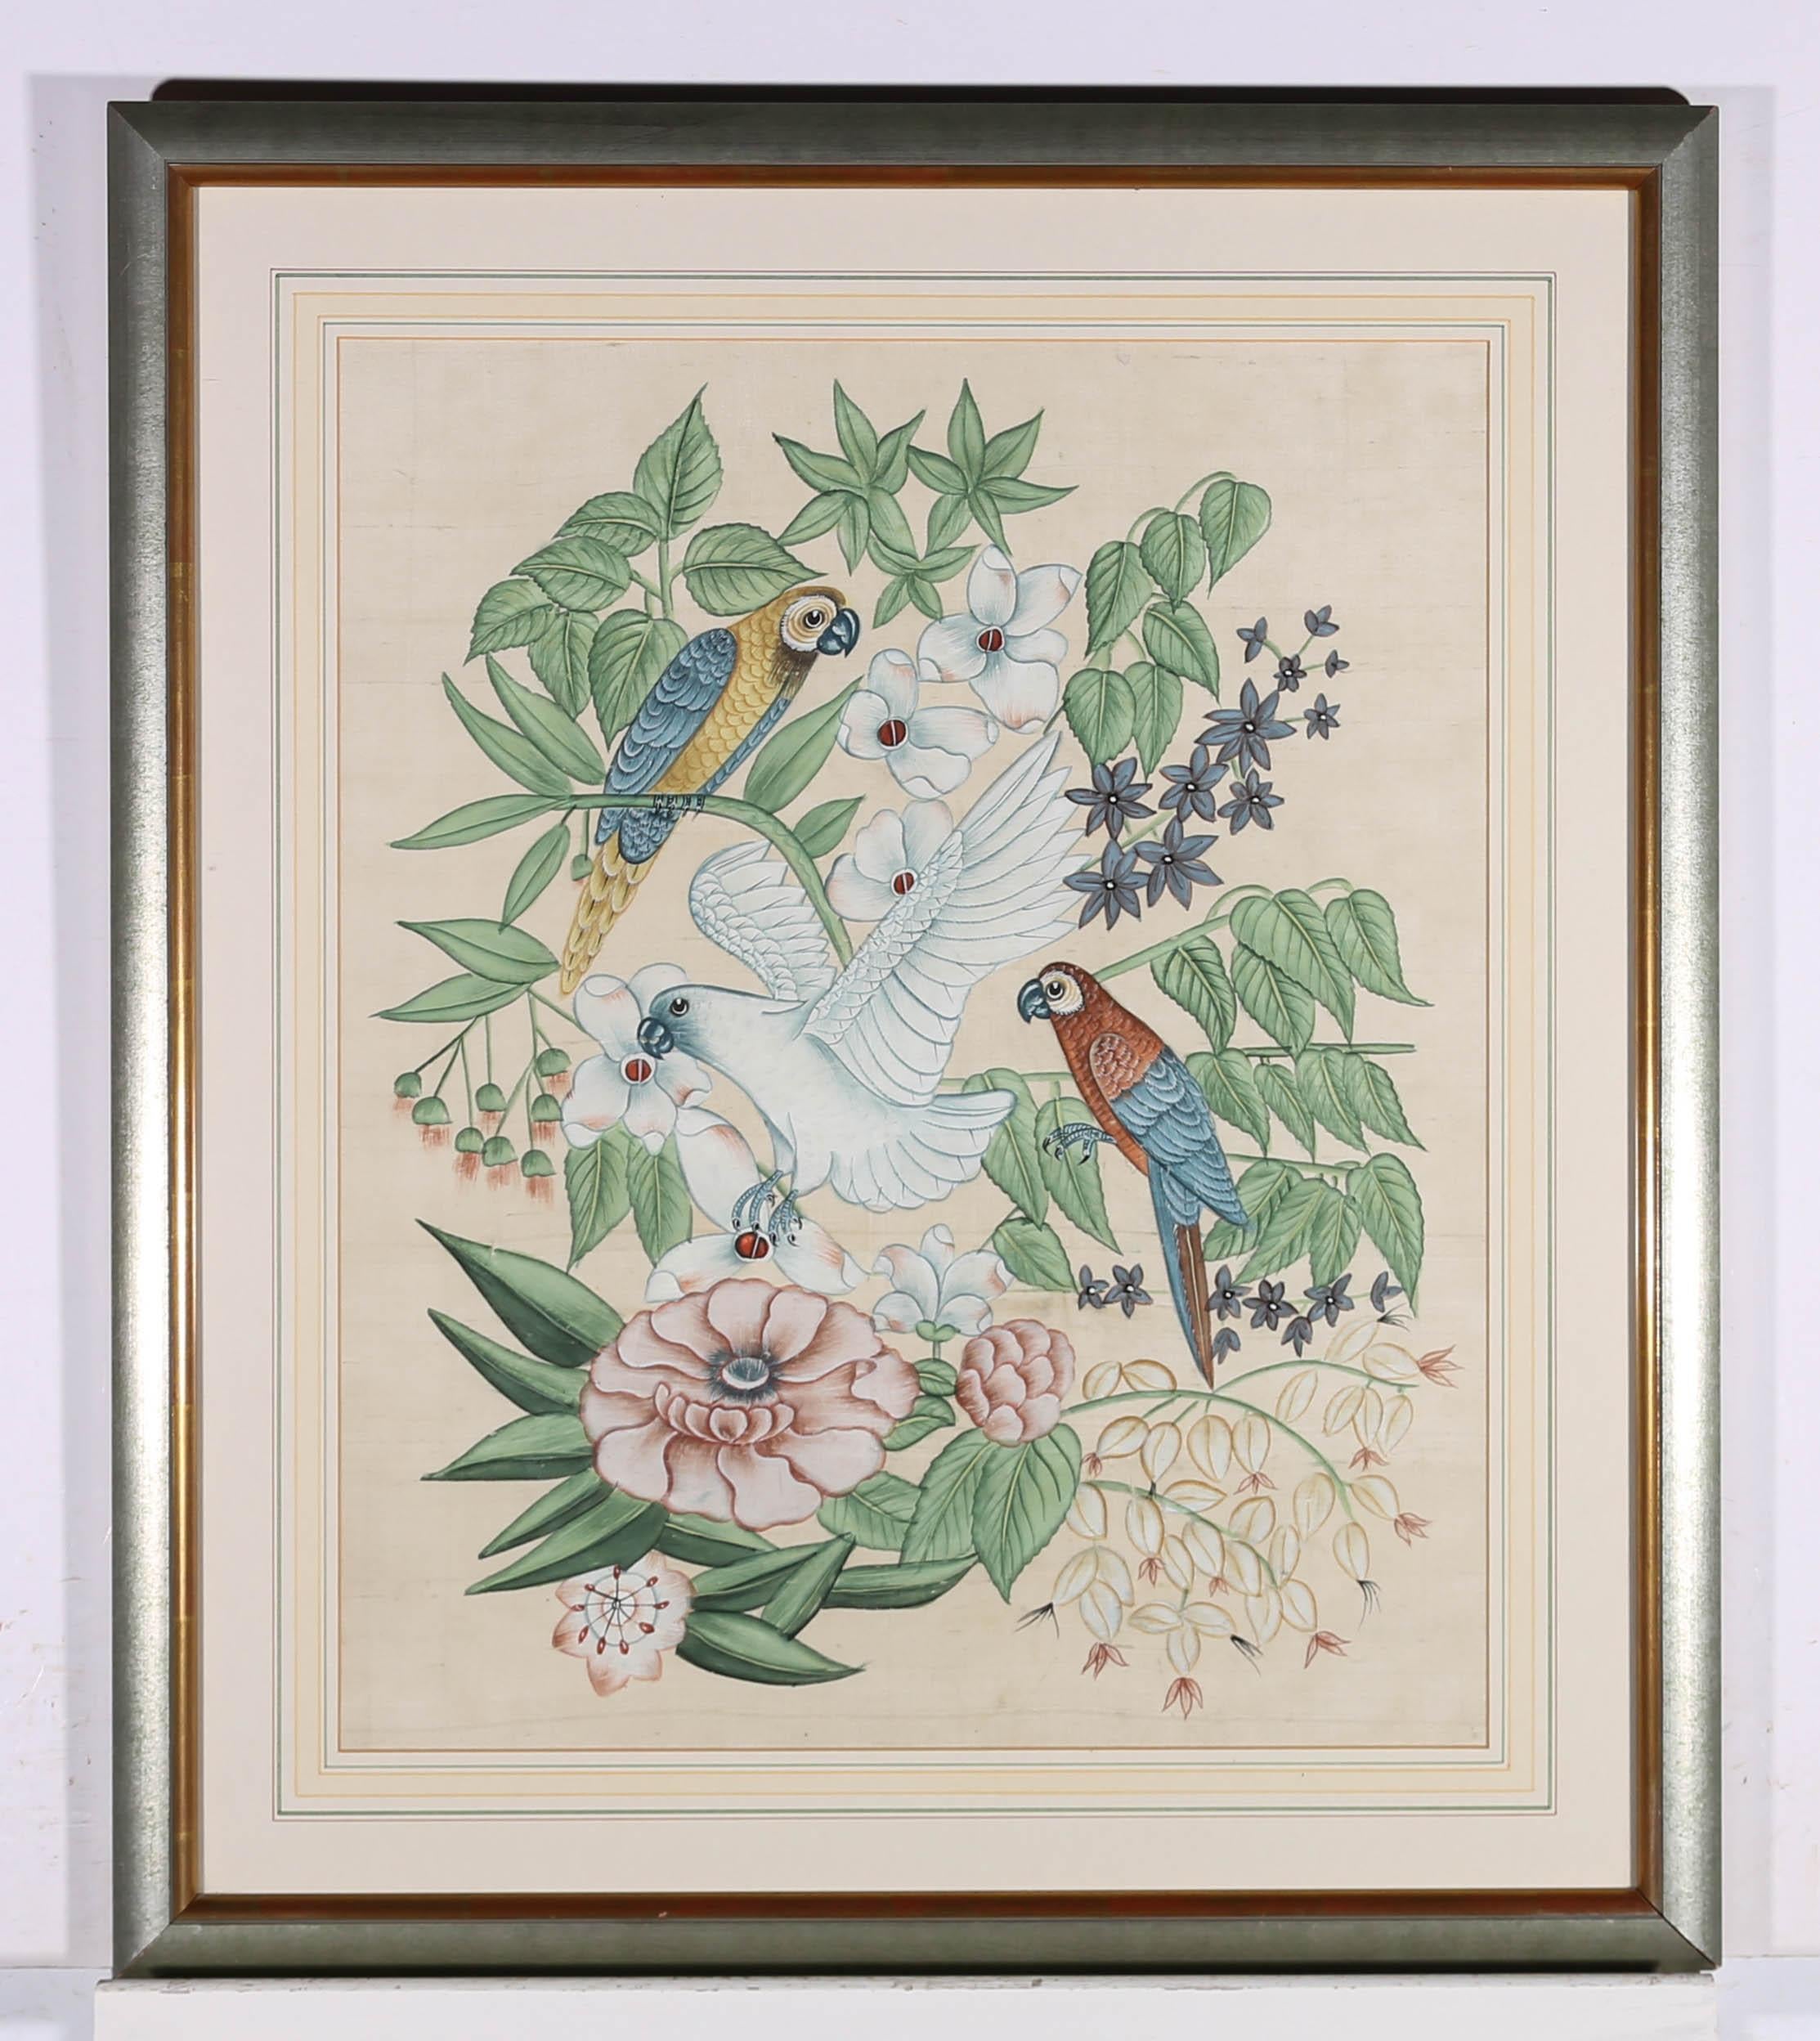 A beautiful 20th Century gouache on cotton silk, showing colourful parrots entwined in flowers and foliage. The painting is unsigned and presented in a 20th Century silver frame with wash-line mount. On silk cotton.

